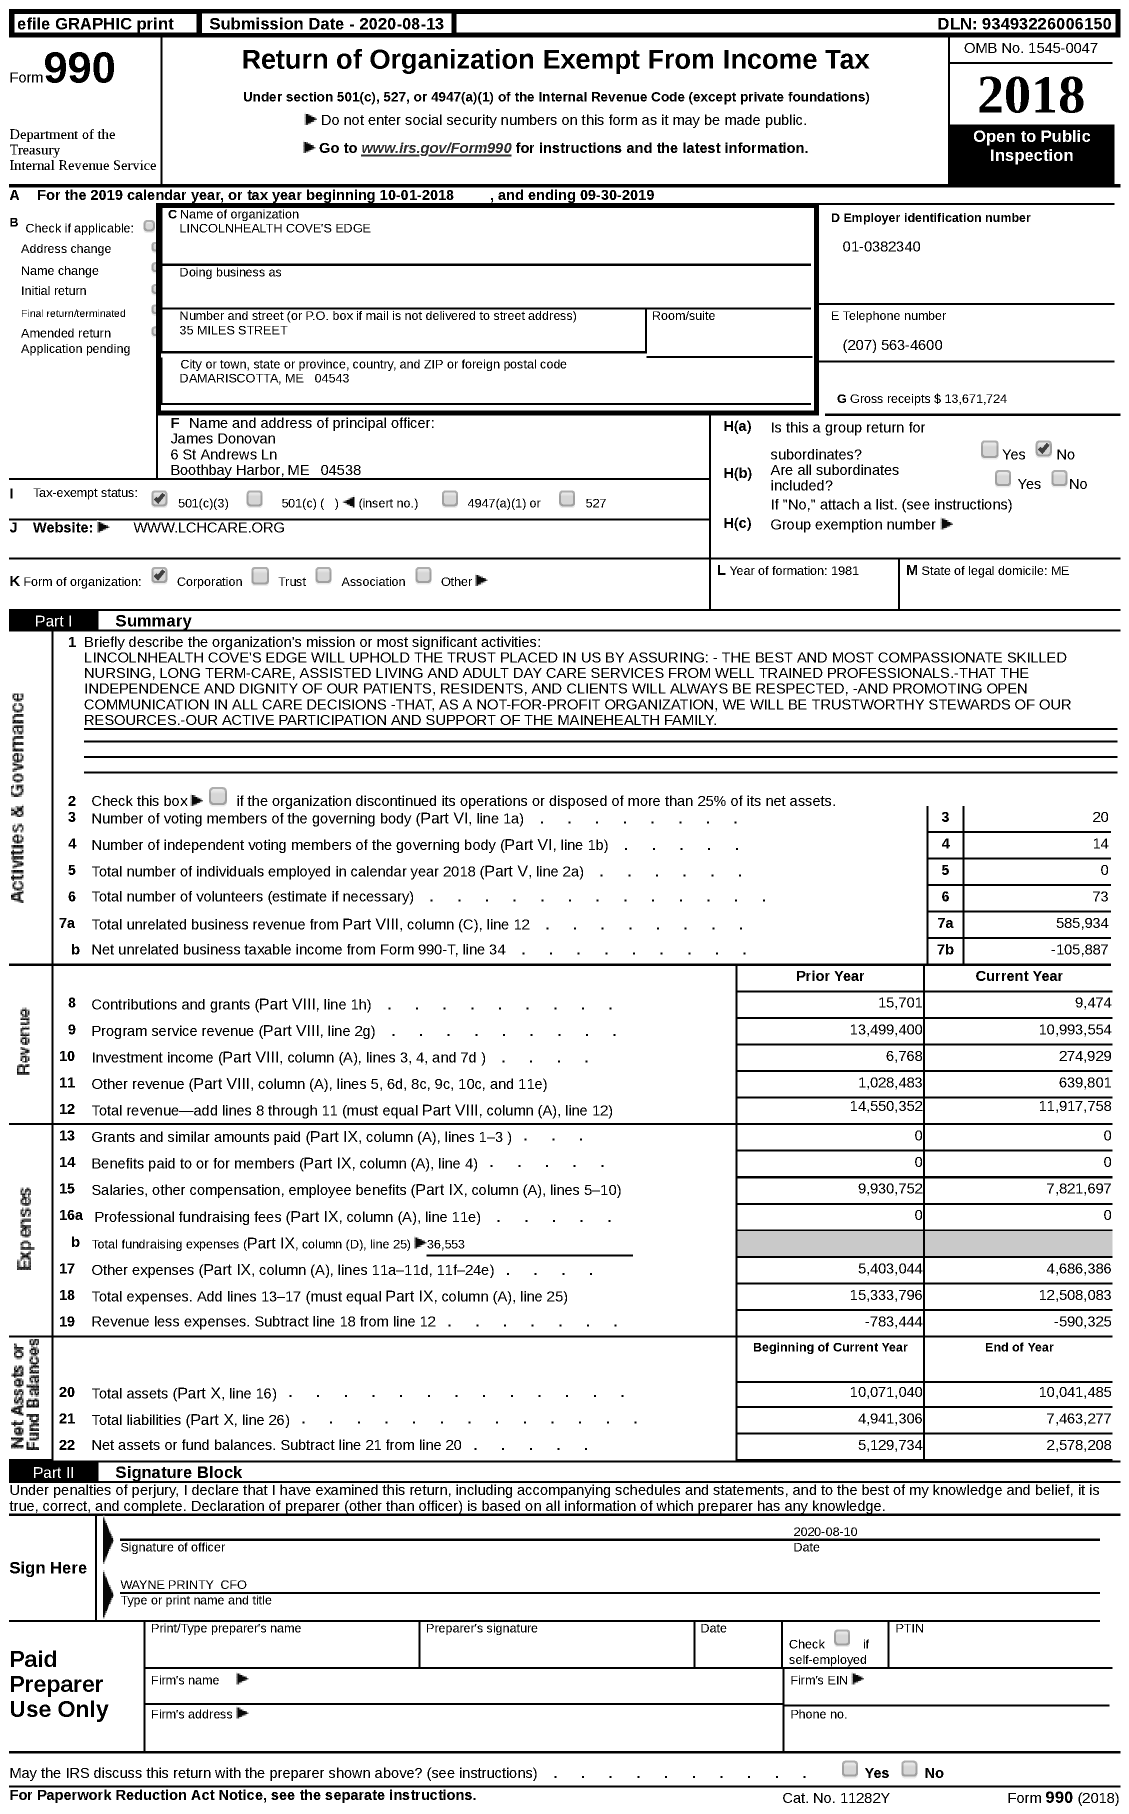 Image of first page of 2018 Form 990 for Lincolnhealth Cove's Edge